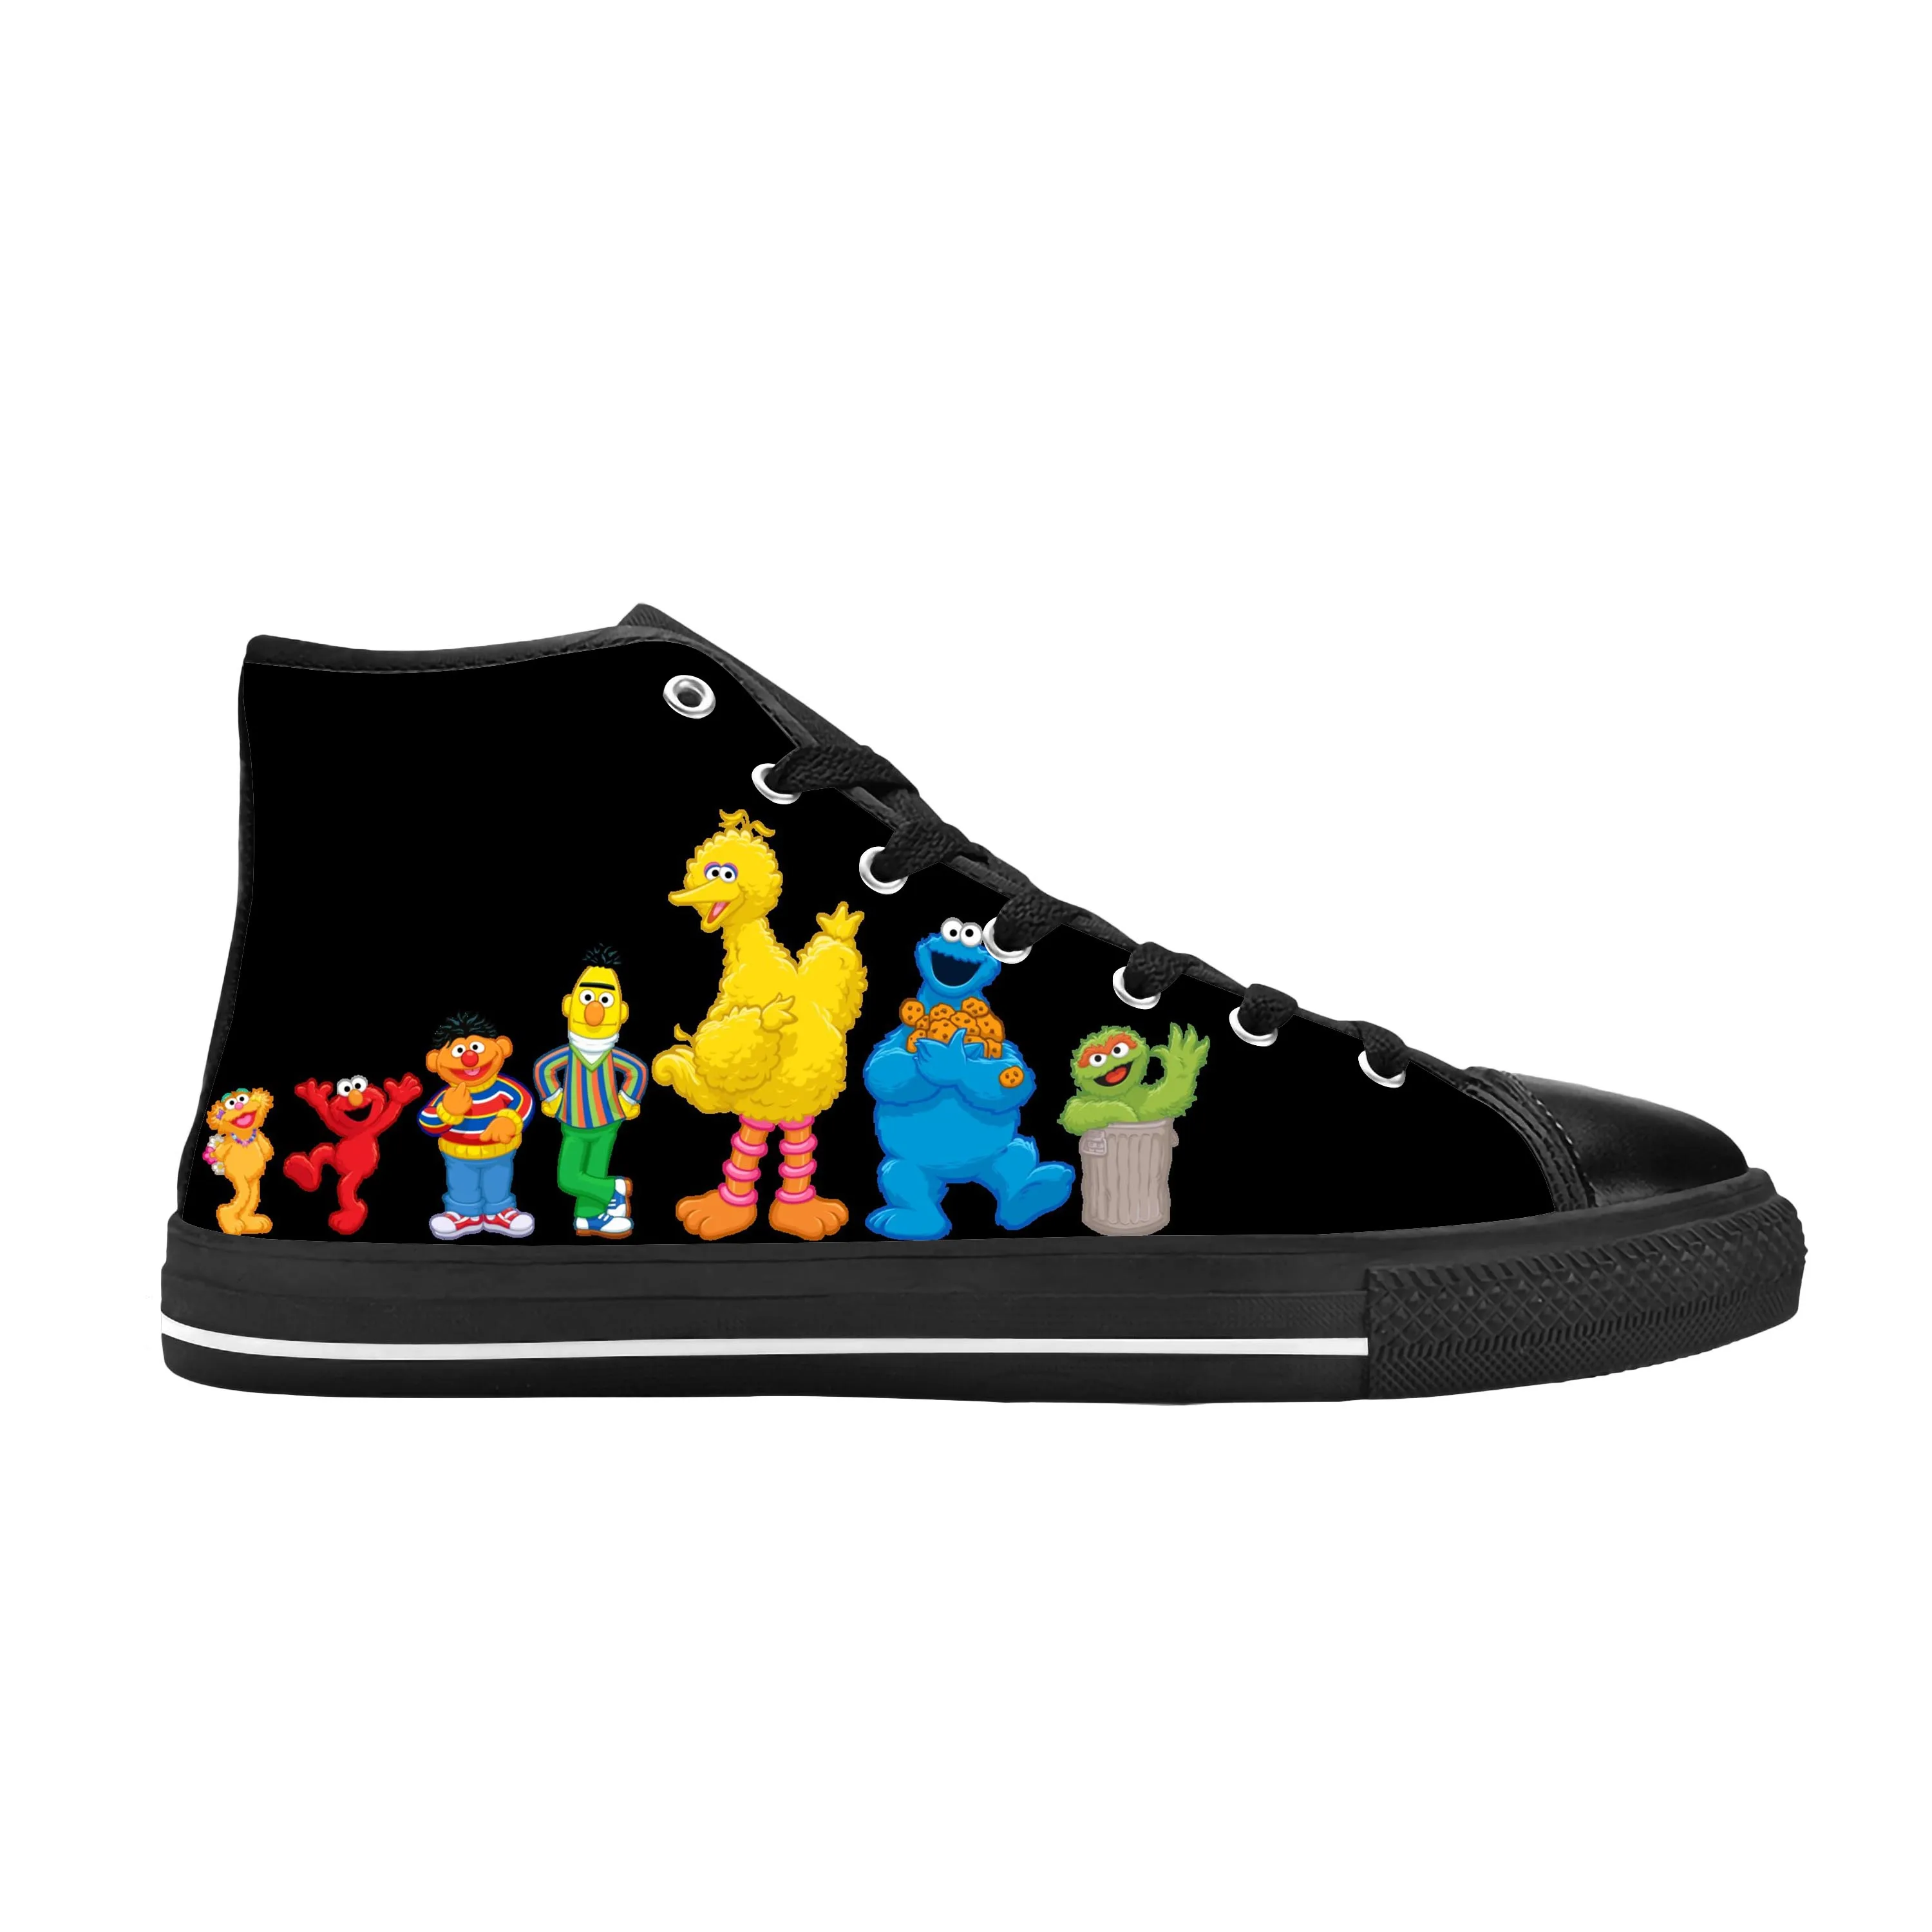 

Sesame Street Elmo Cookie Monster Muppet Cartoon Casual Cloth Shoes High Top Comfortable Breathable 3D Print Men Women Sneakers